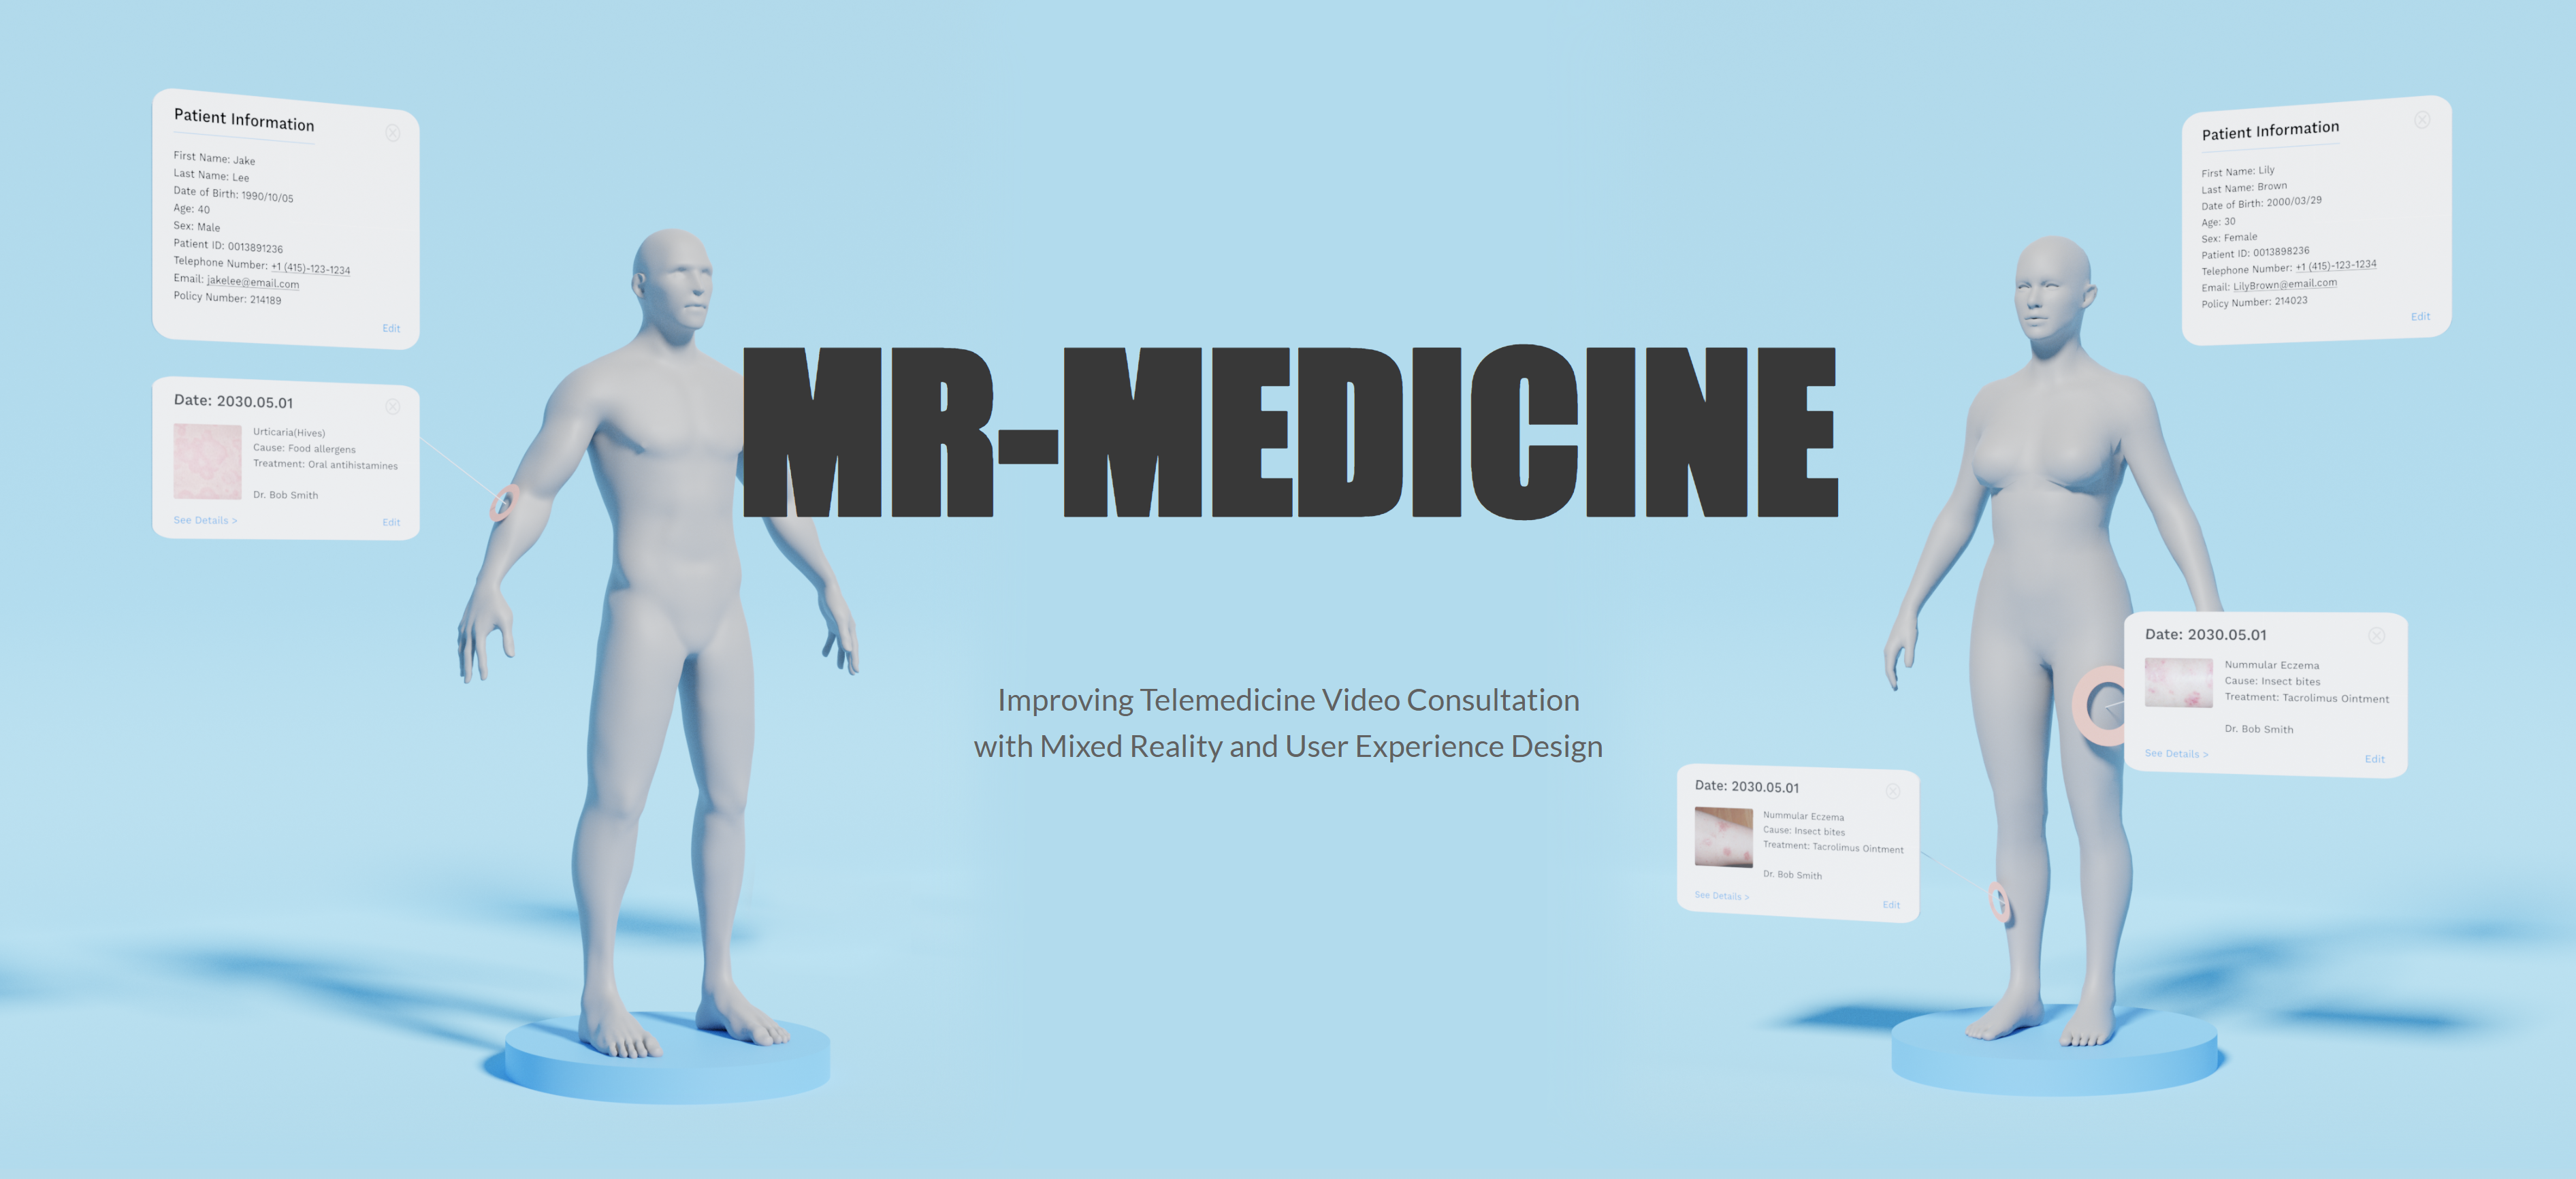 MR-Medicine: Improving Telemedicine Video Consultation with Mixed Reality and User Experience Design